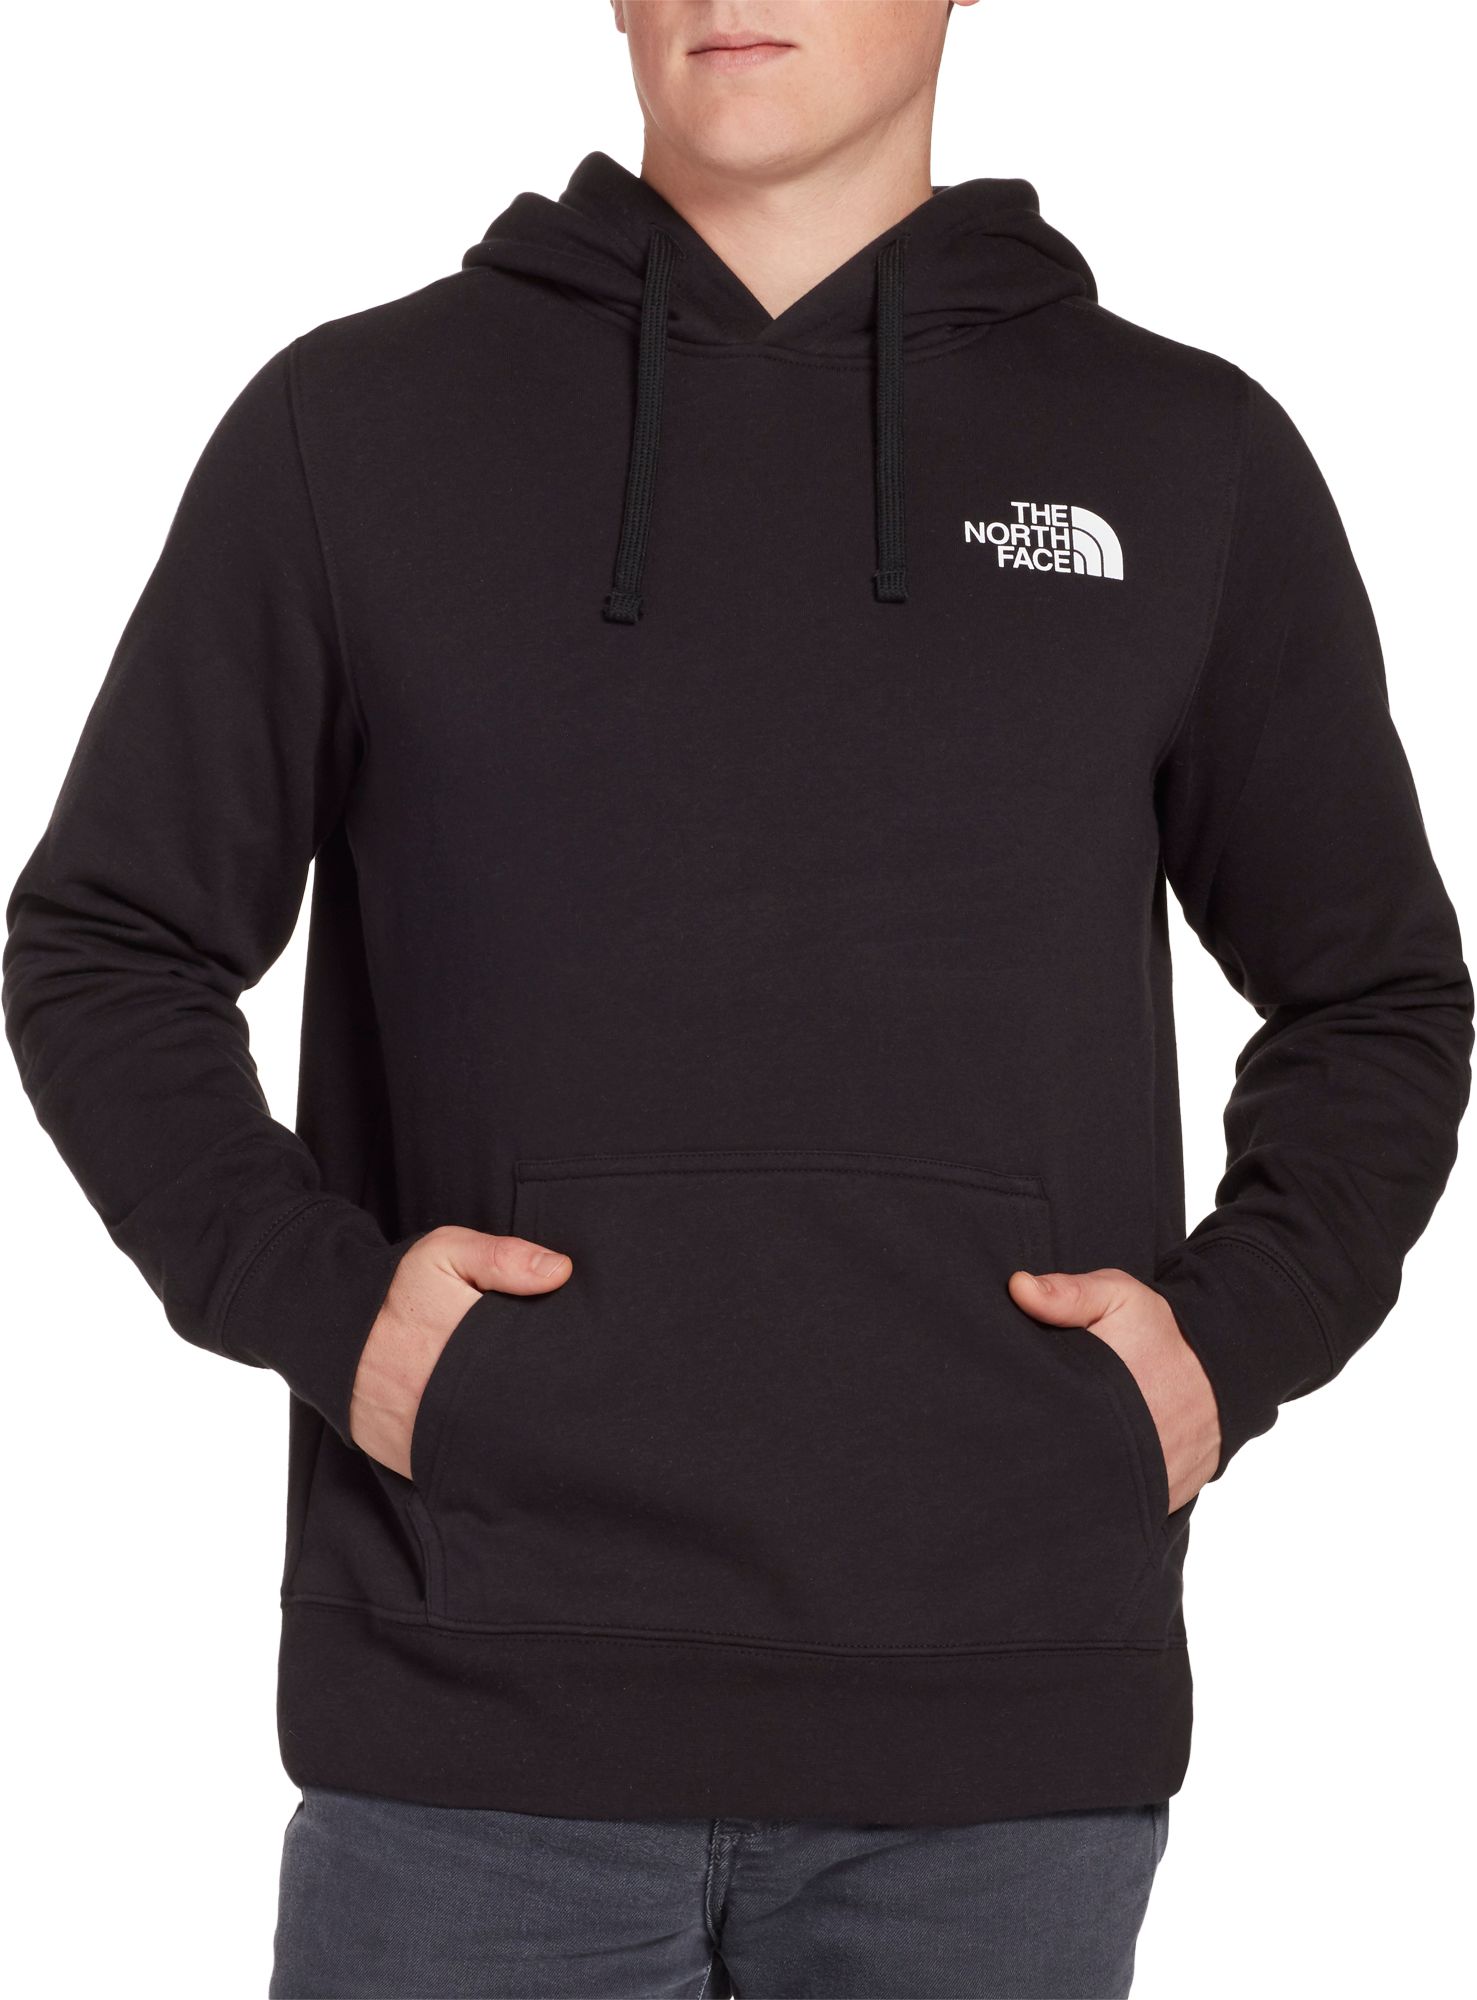 The North Face Men's Red Box Pullover Hoodie - .00